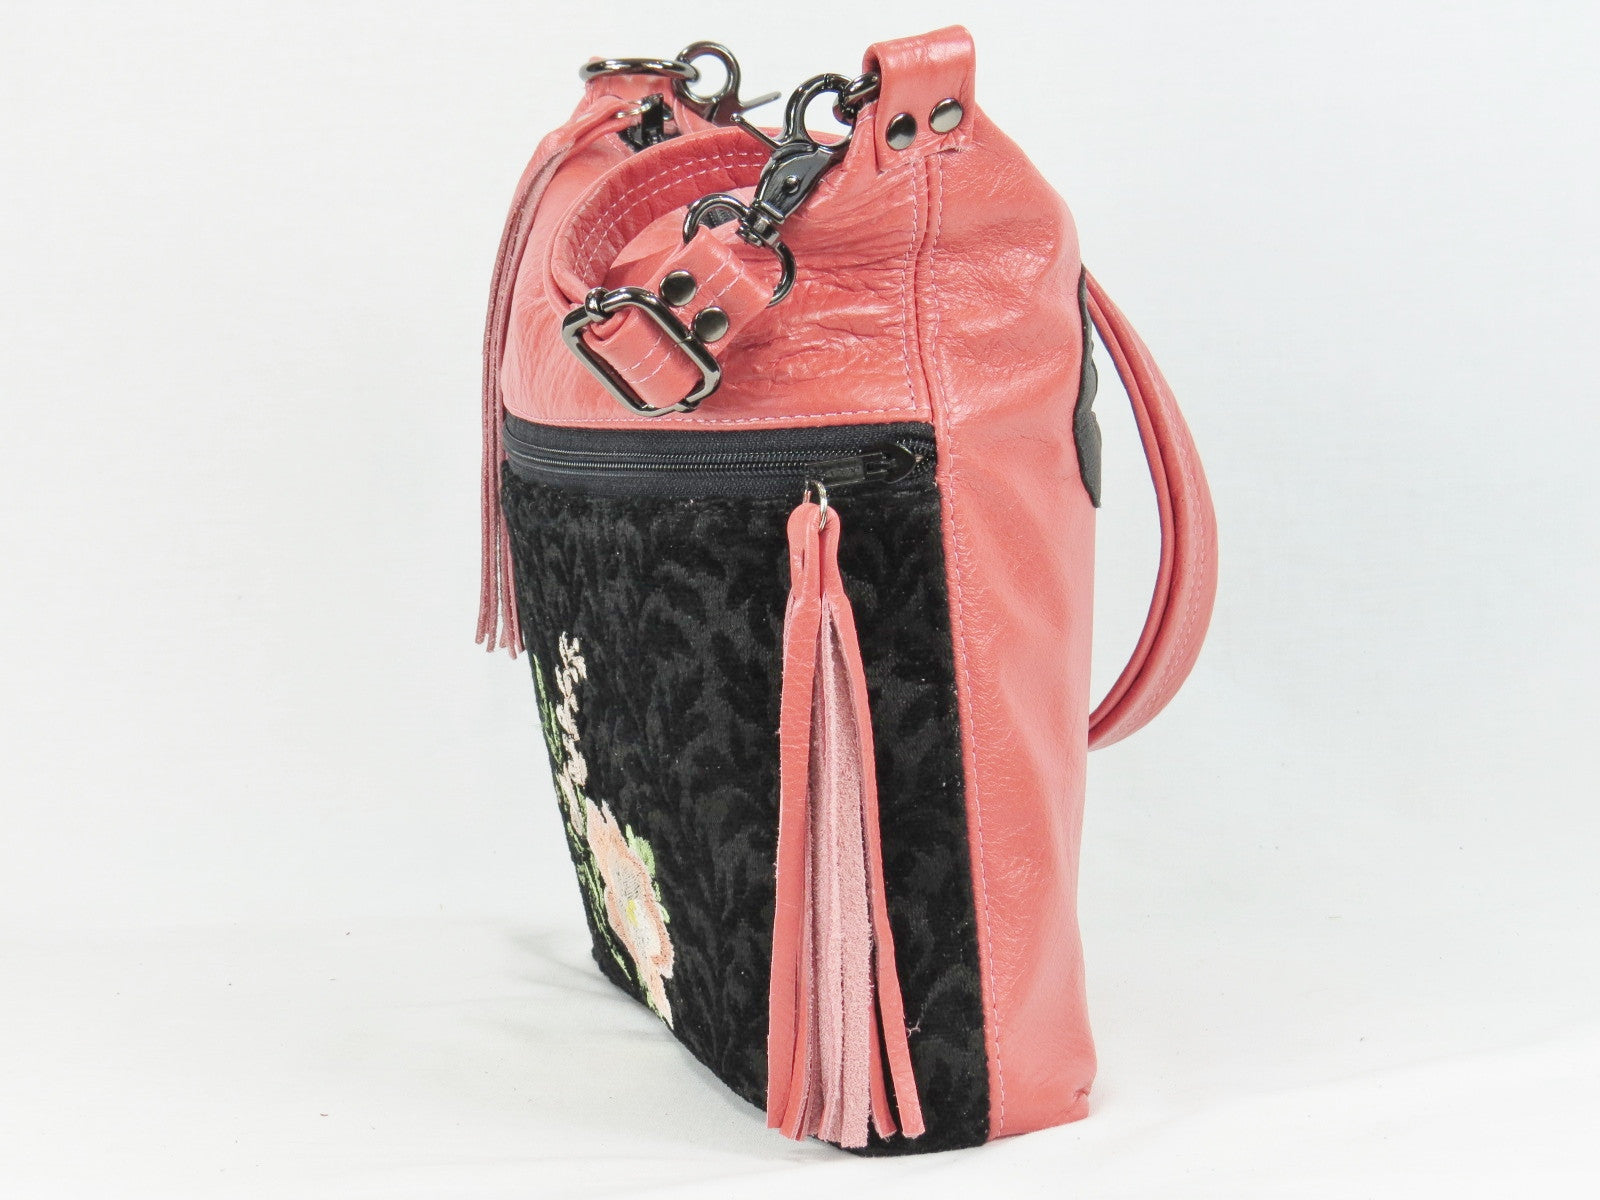 Black and Coral Leather Cross Body Bag Asian Floral Embroidery side view with tassel